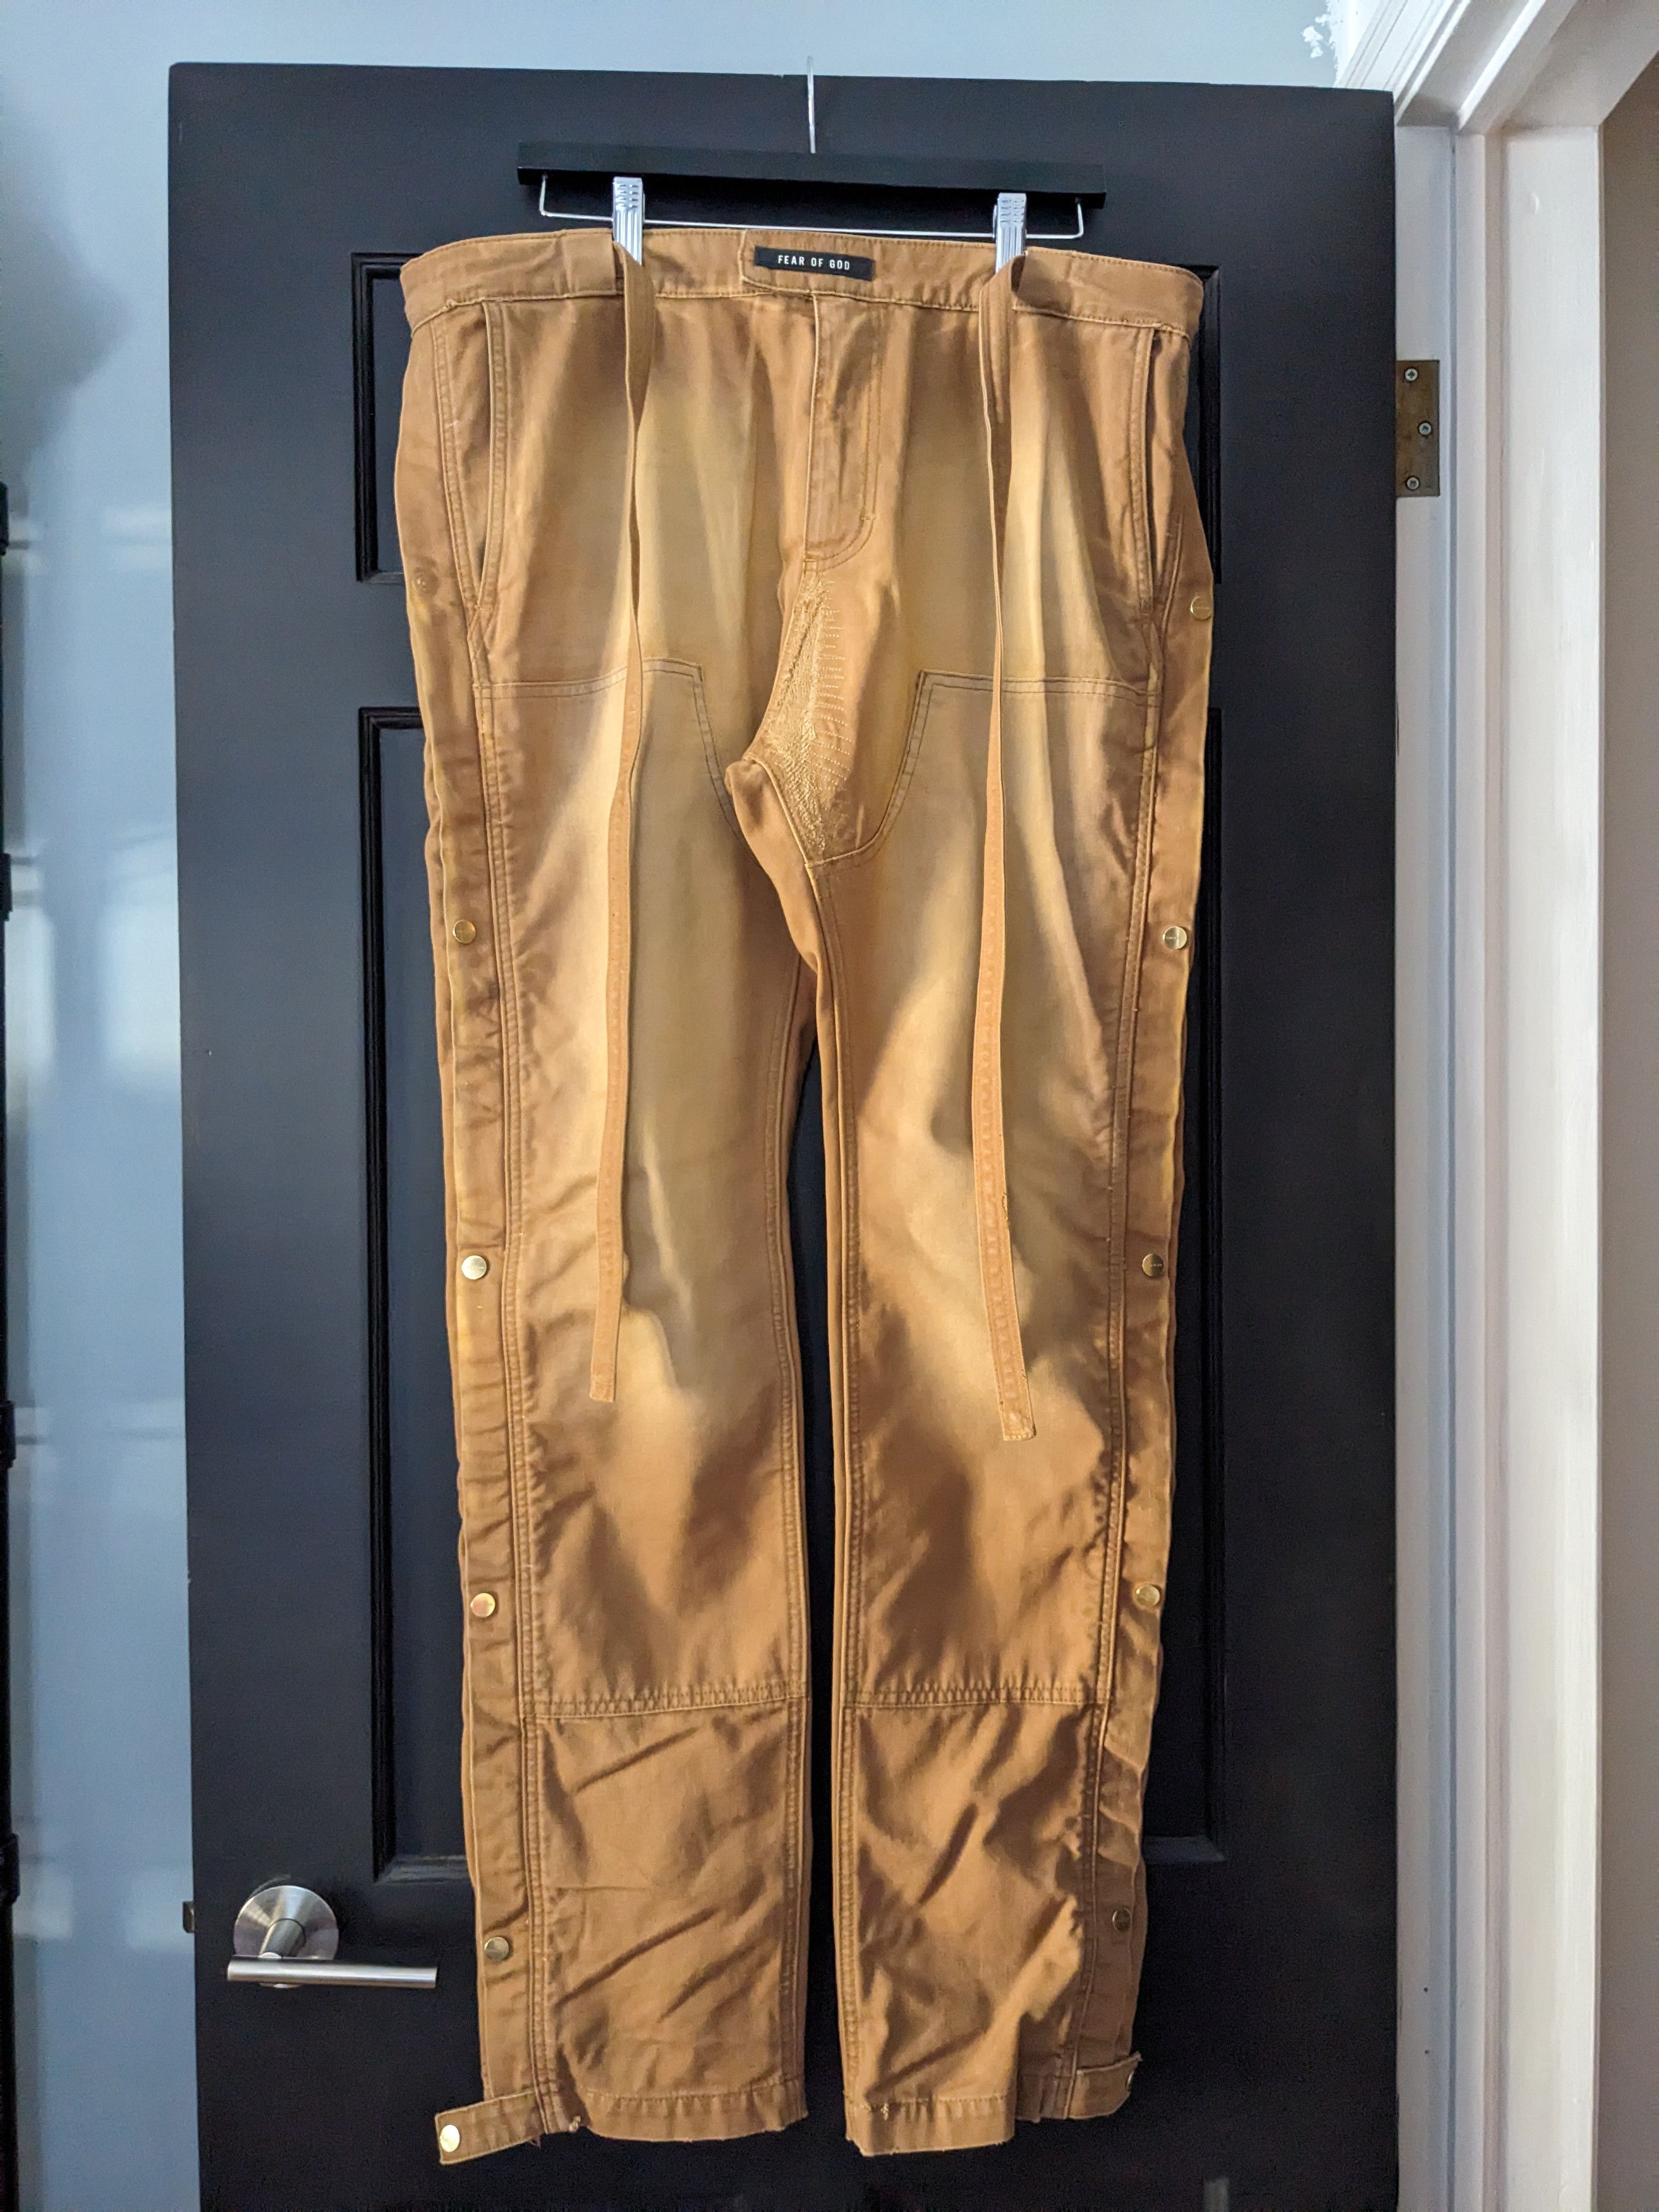 Fear of God 6th Collection Distressed Tear-Away Work Pants | Grailed